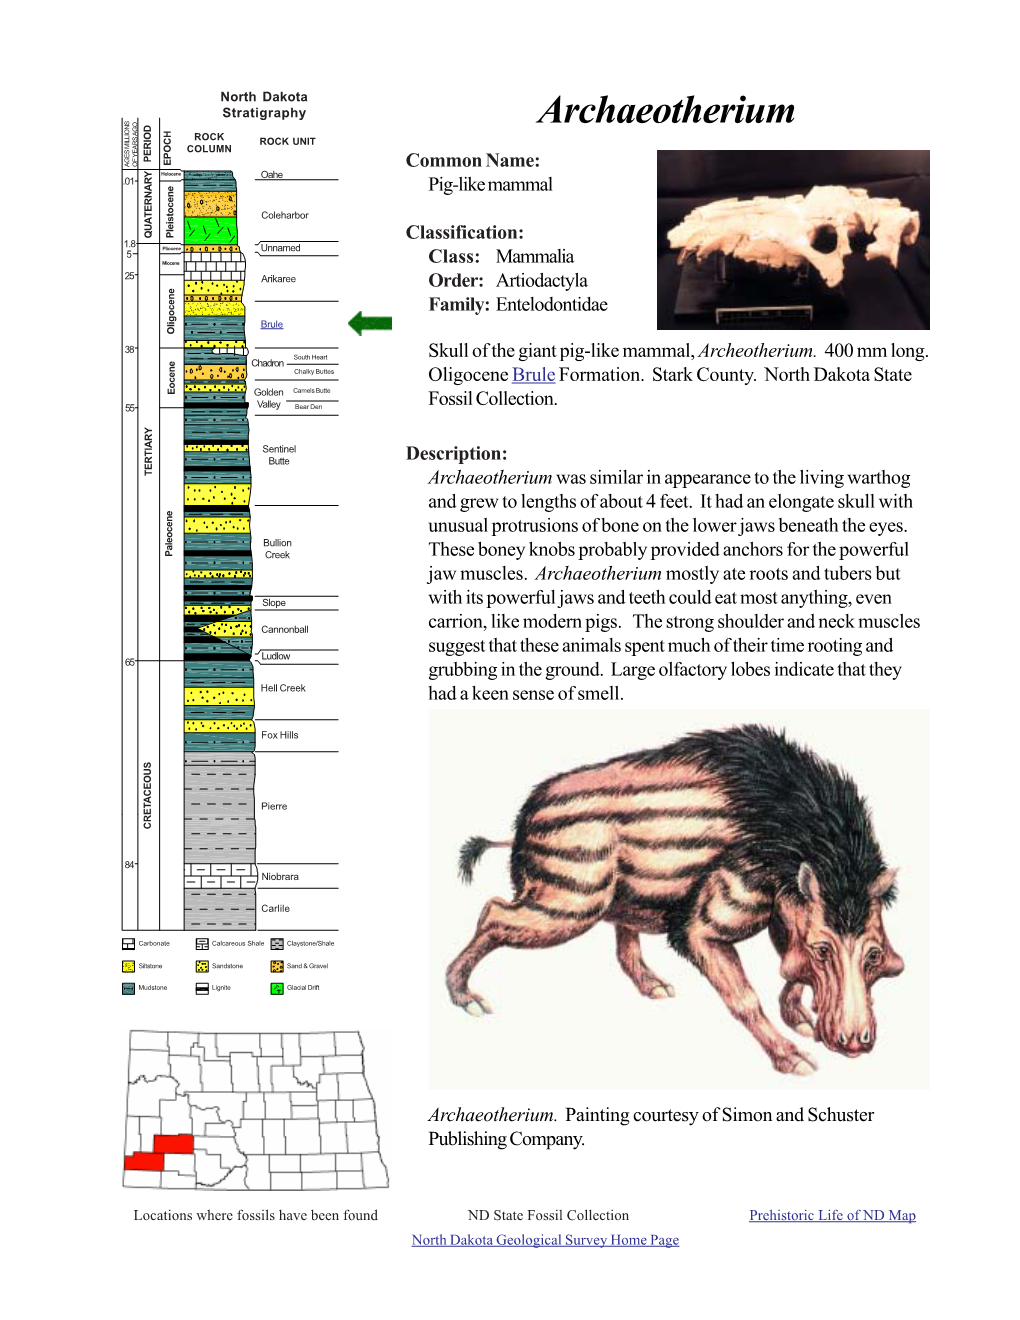 Archaeotherium ROCK ROCK UNIT COLUMN PERIOD EPOCH AGES MILLIONS of YEARS AGO Common Name: Holocene Oahe .01 Pig-Like Mammal